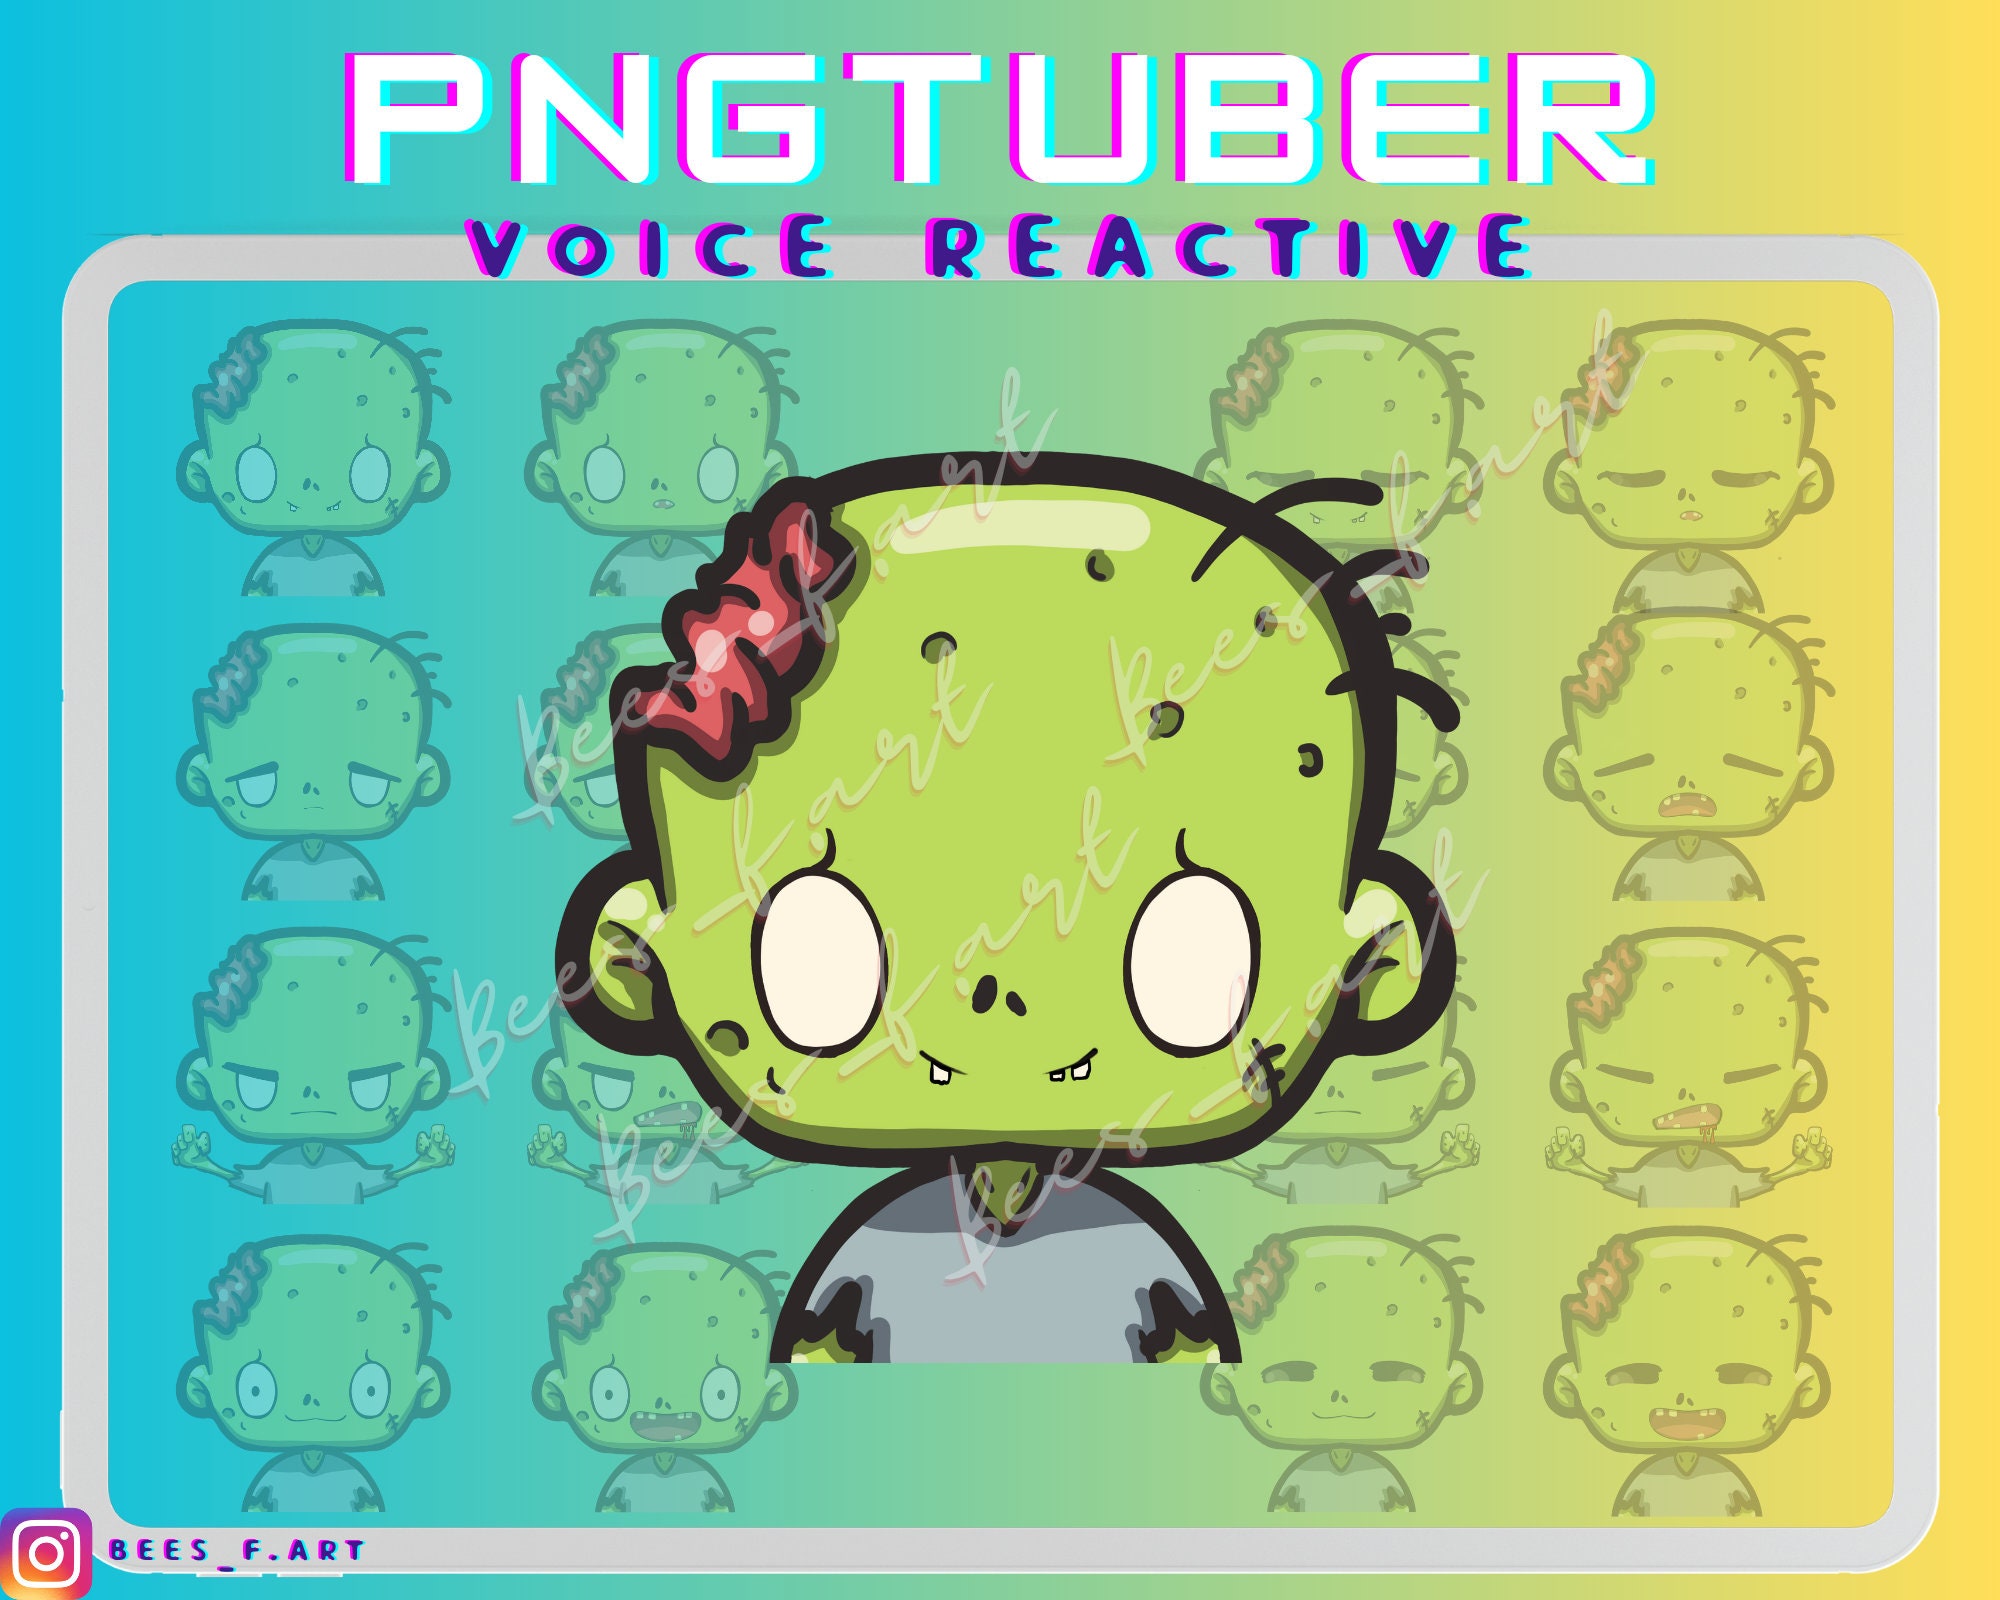 TBH Creature PNG Tuber - Veadotube Mini File - ZIP File